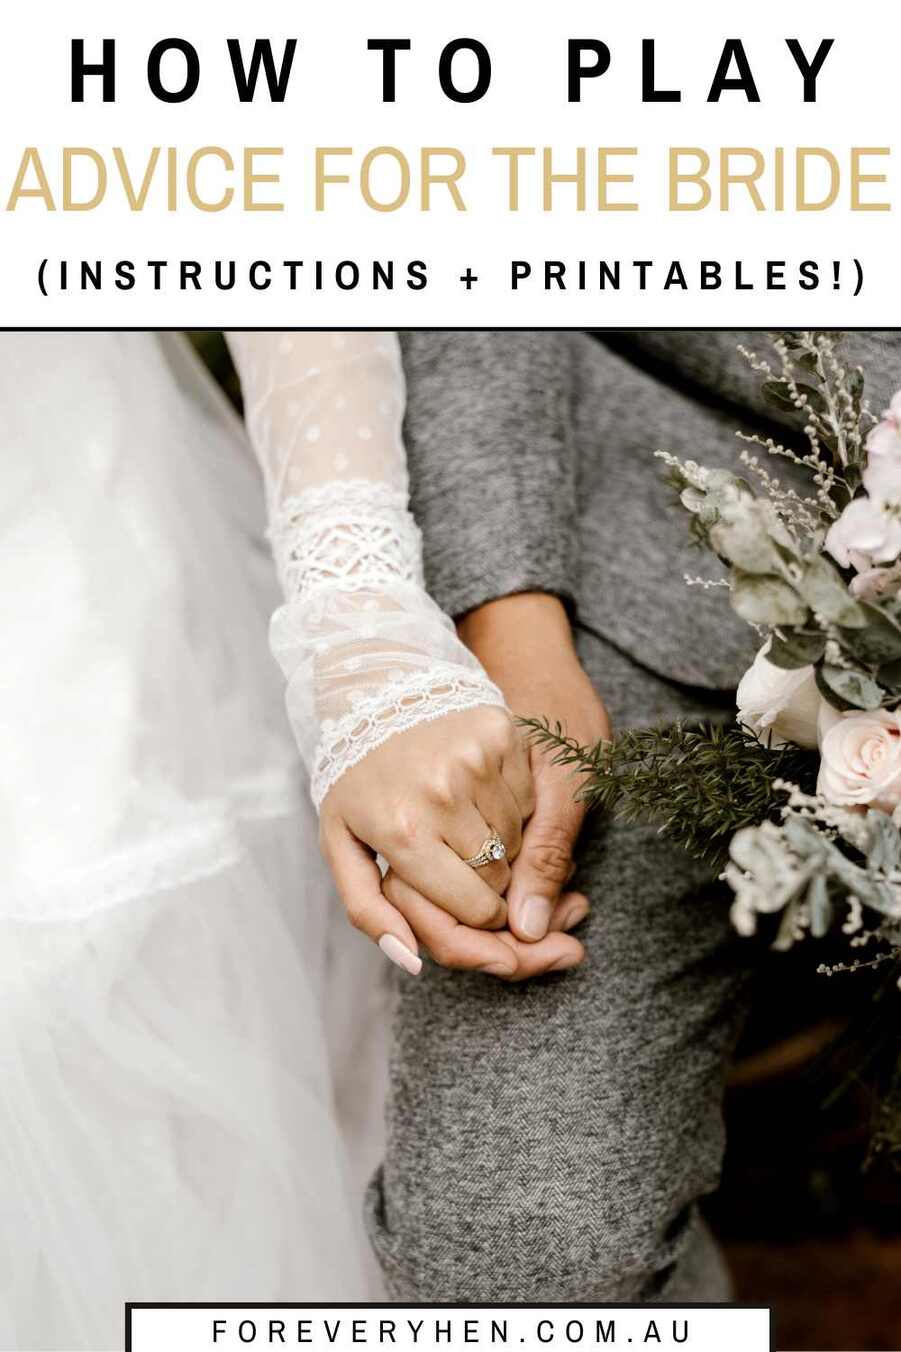 Image of a newly married couple holding hands. Text overlay: how to play advice for the bride (instructions + printables!)